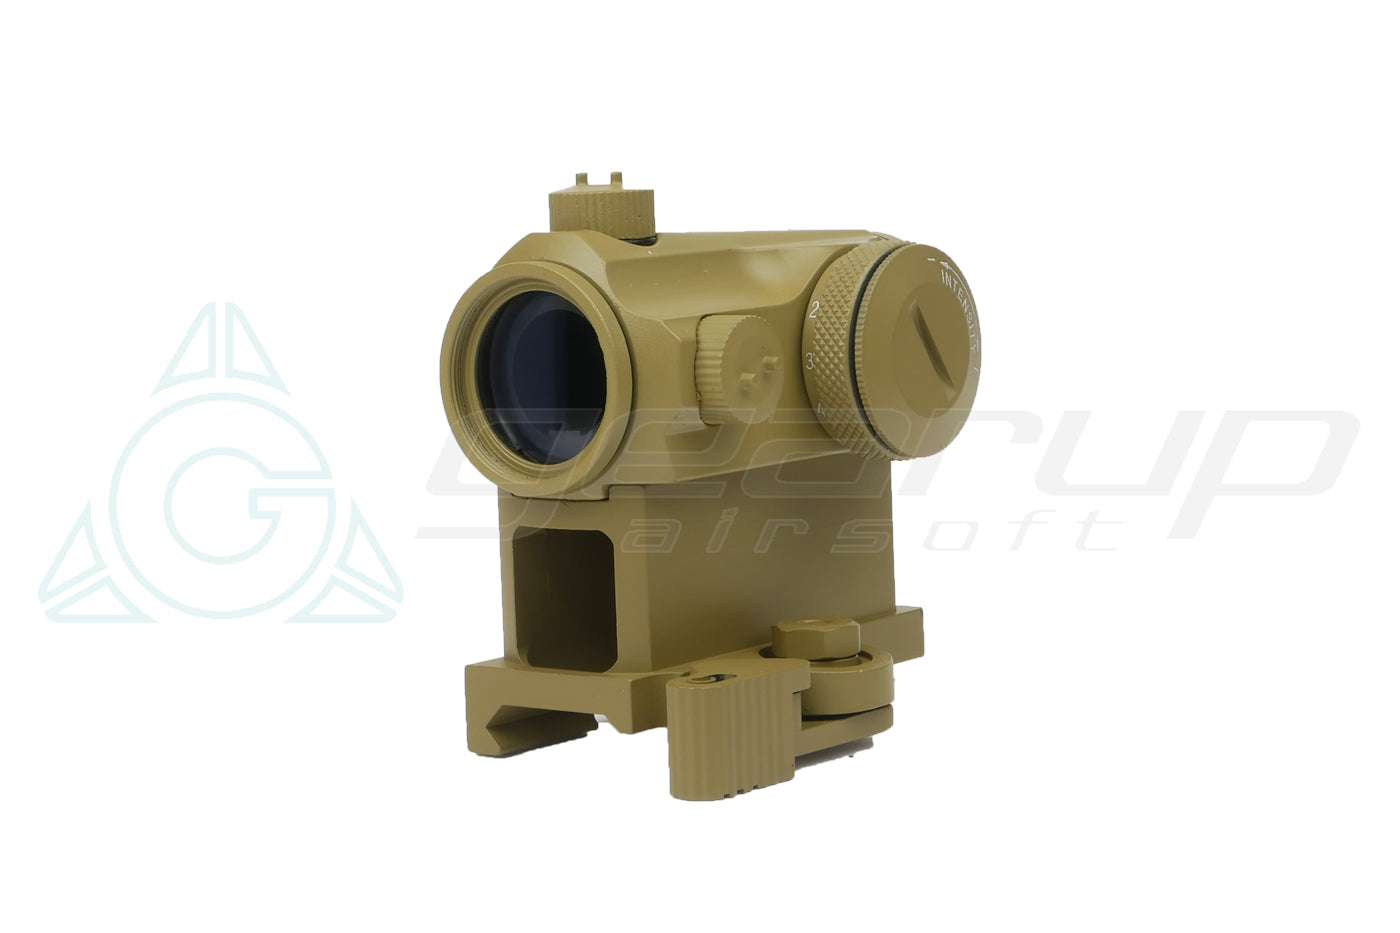 TT1 Red Dot, QD Mount (Tan) with lens cover